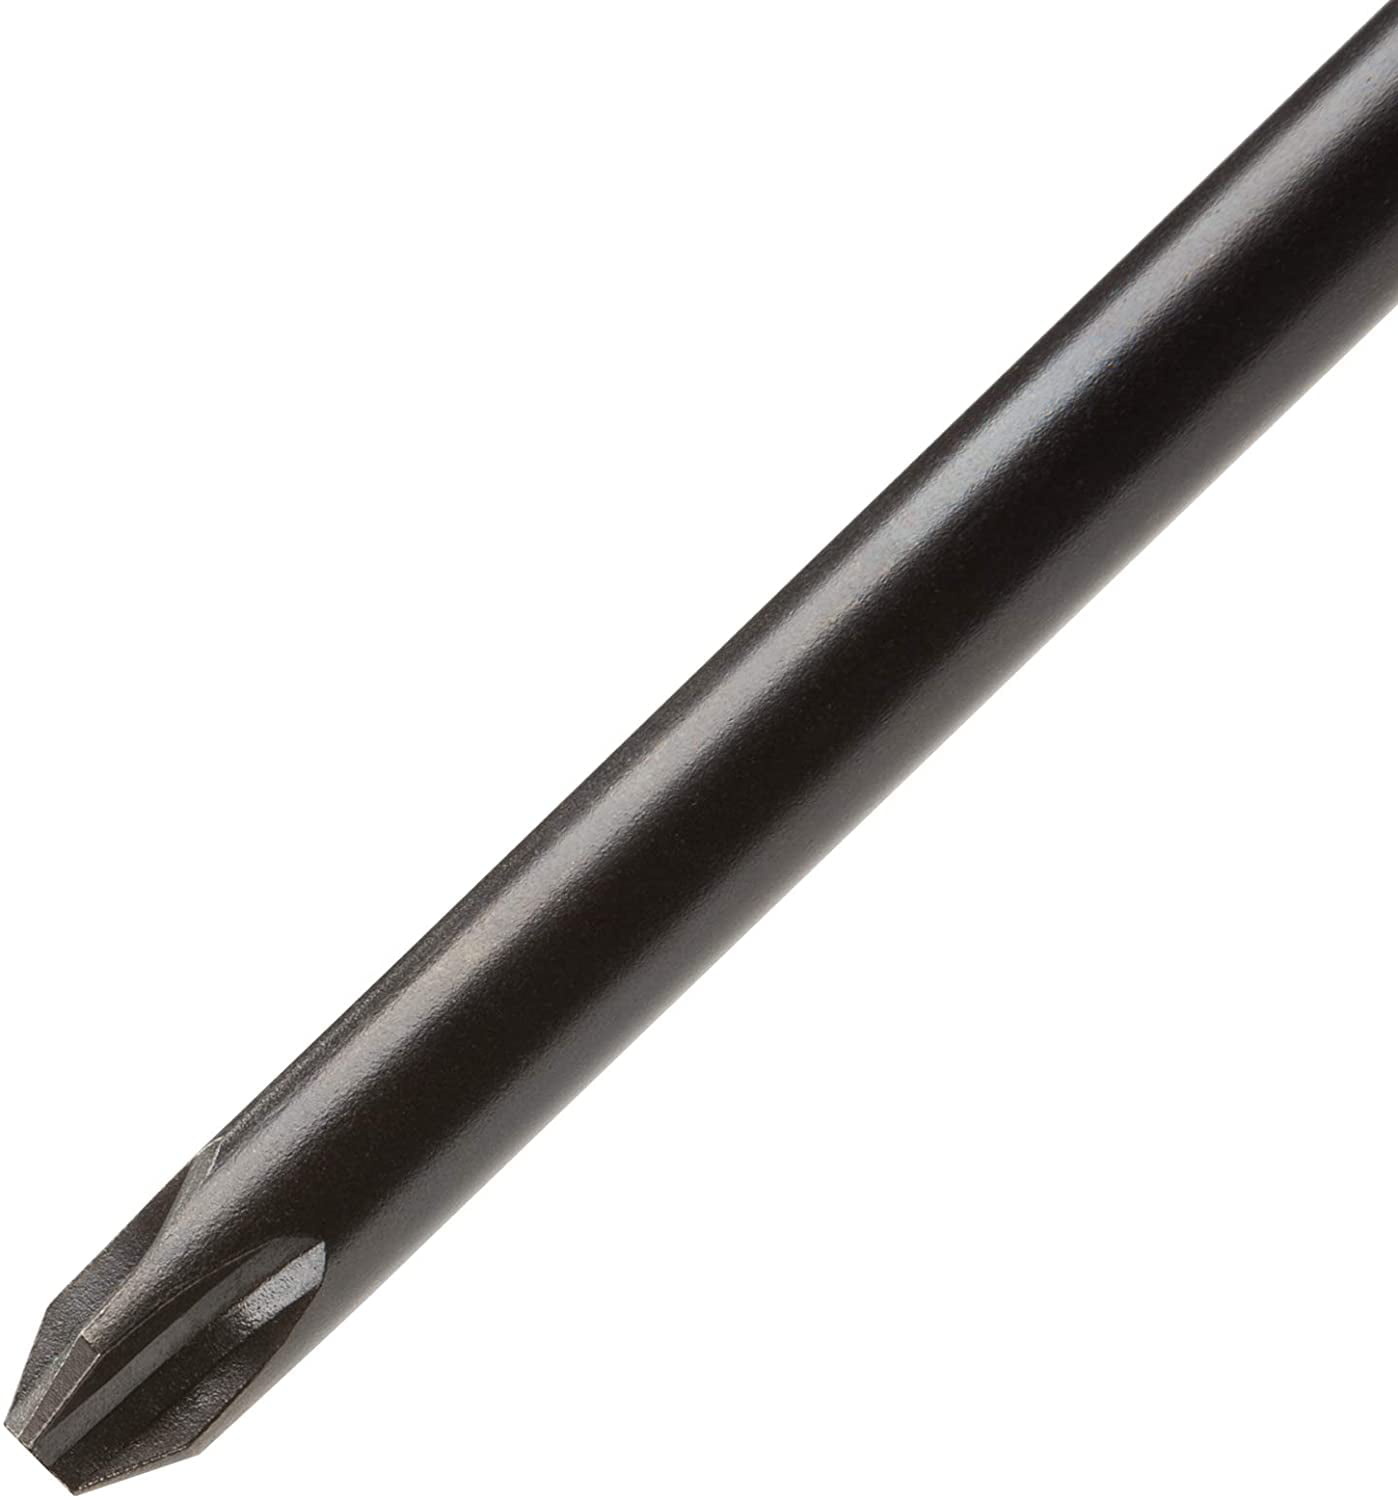 TEKTON #3 Phillips High-Torque Screwdriver (Black Oxide Blade) | 26683,  Unique three-sided handle combines maximum power with smooth speed By Visit  